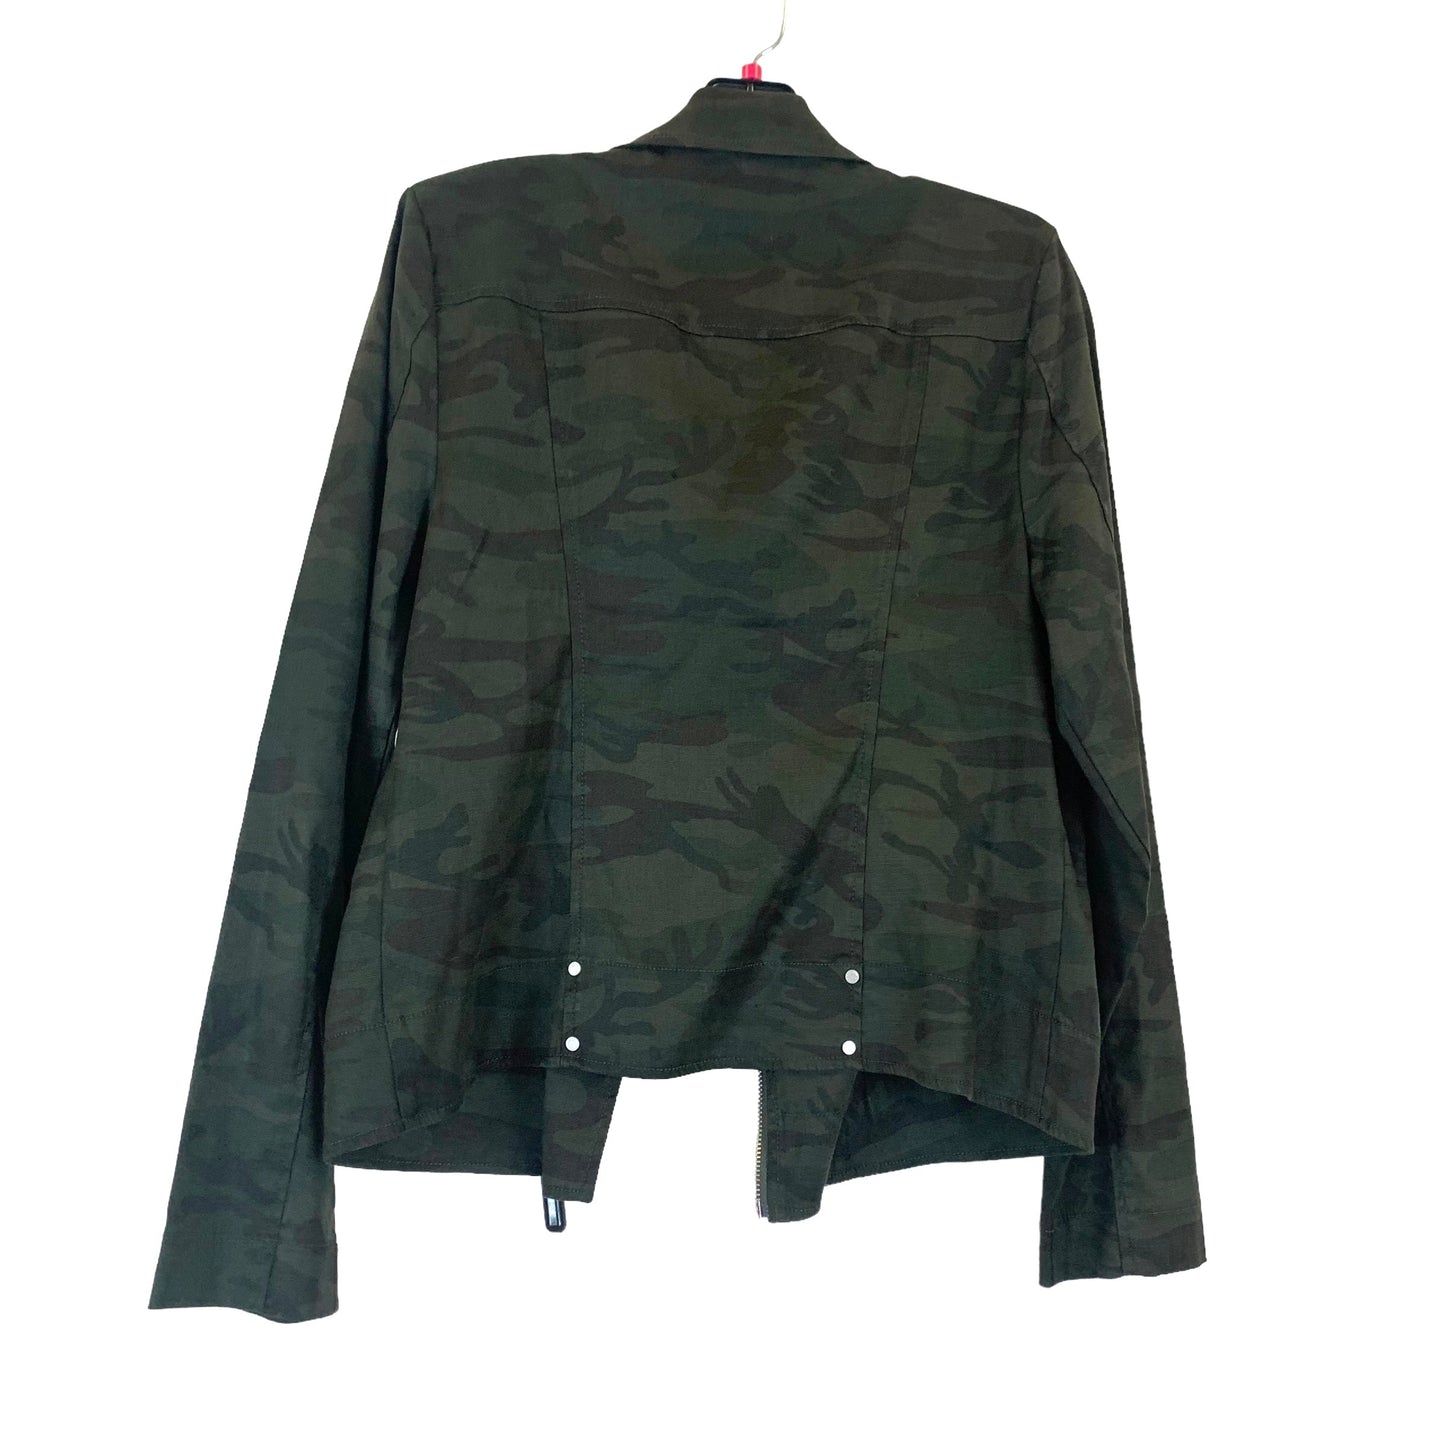 Jacket Other By Level 99  Size: M